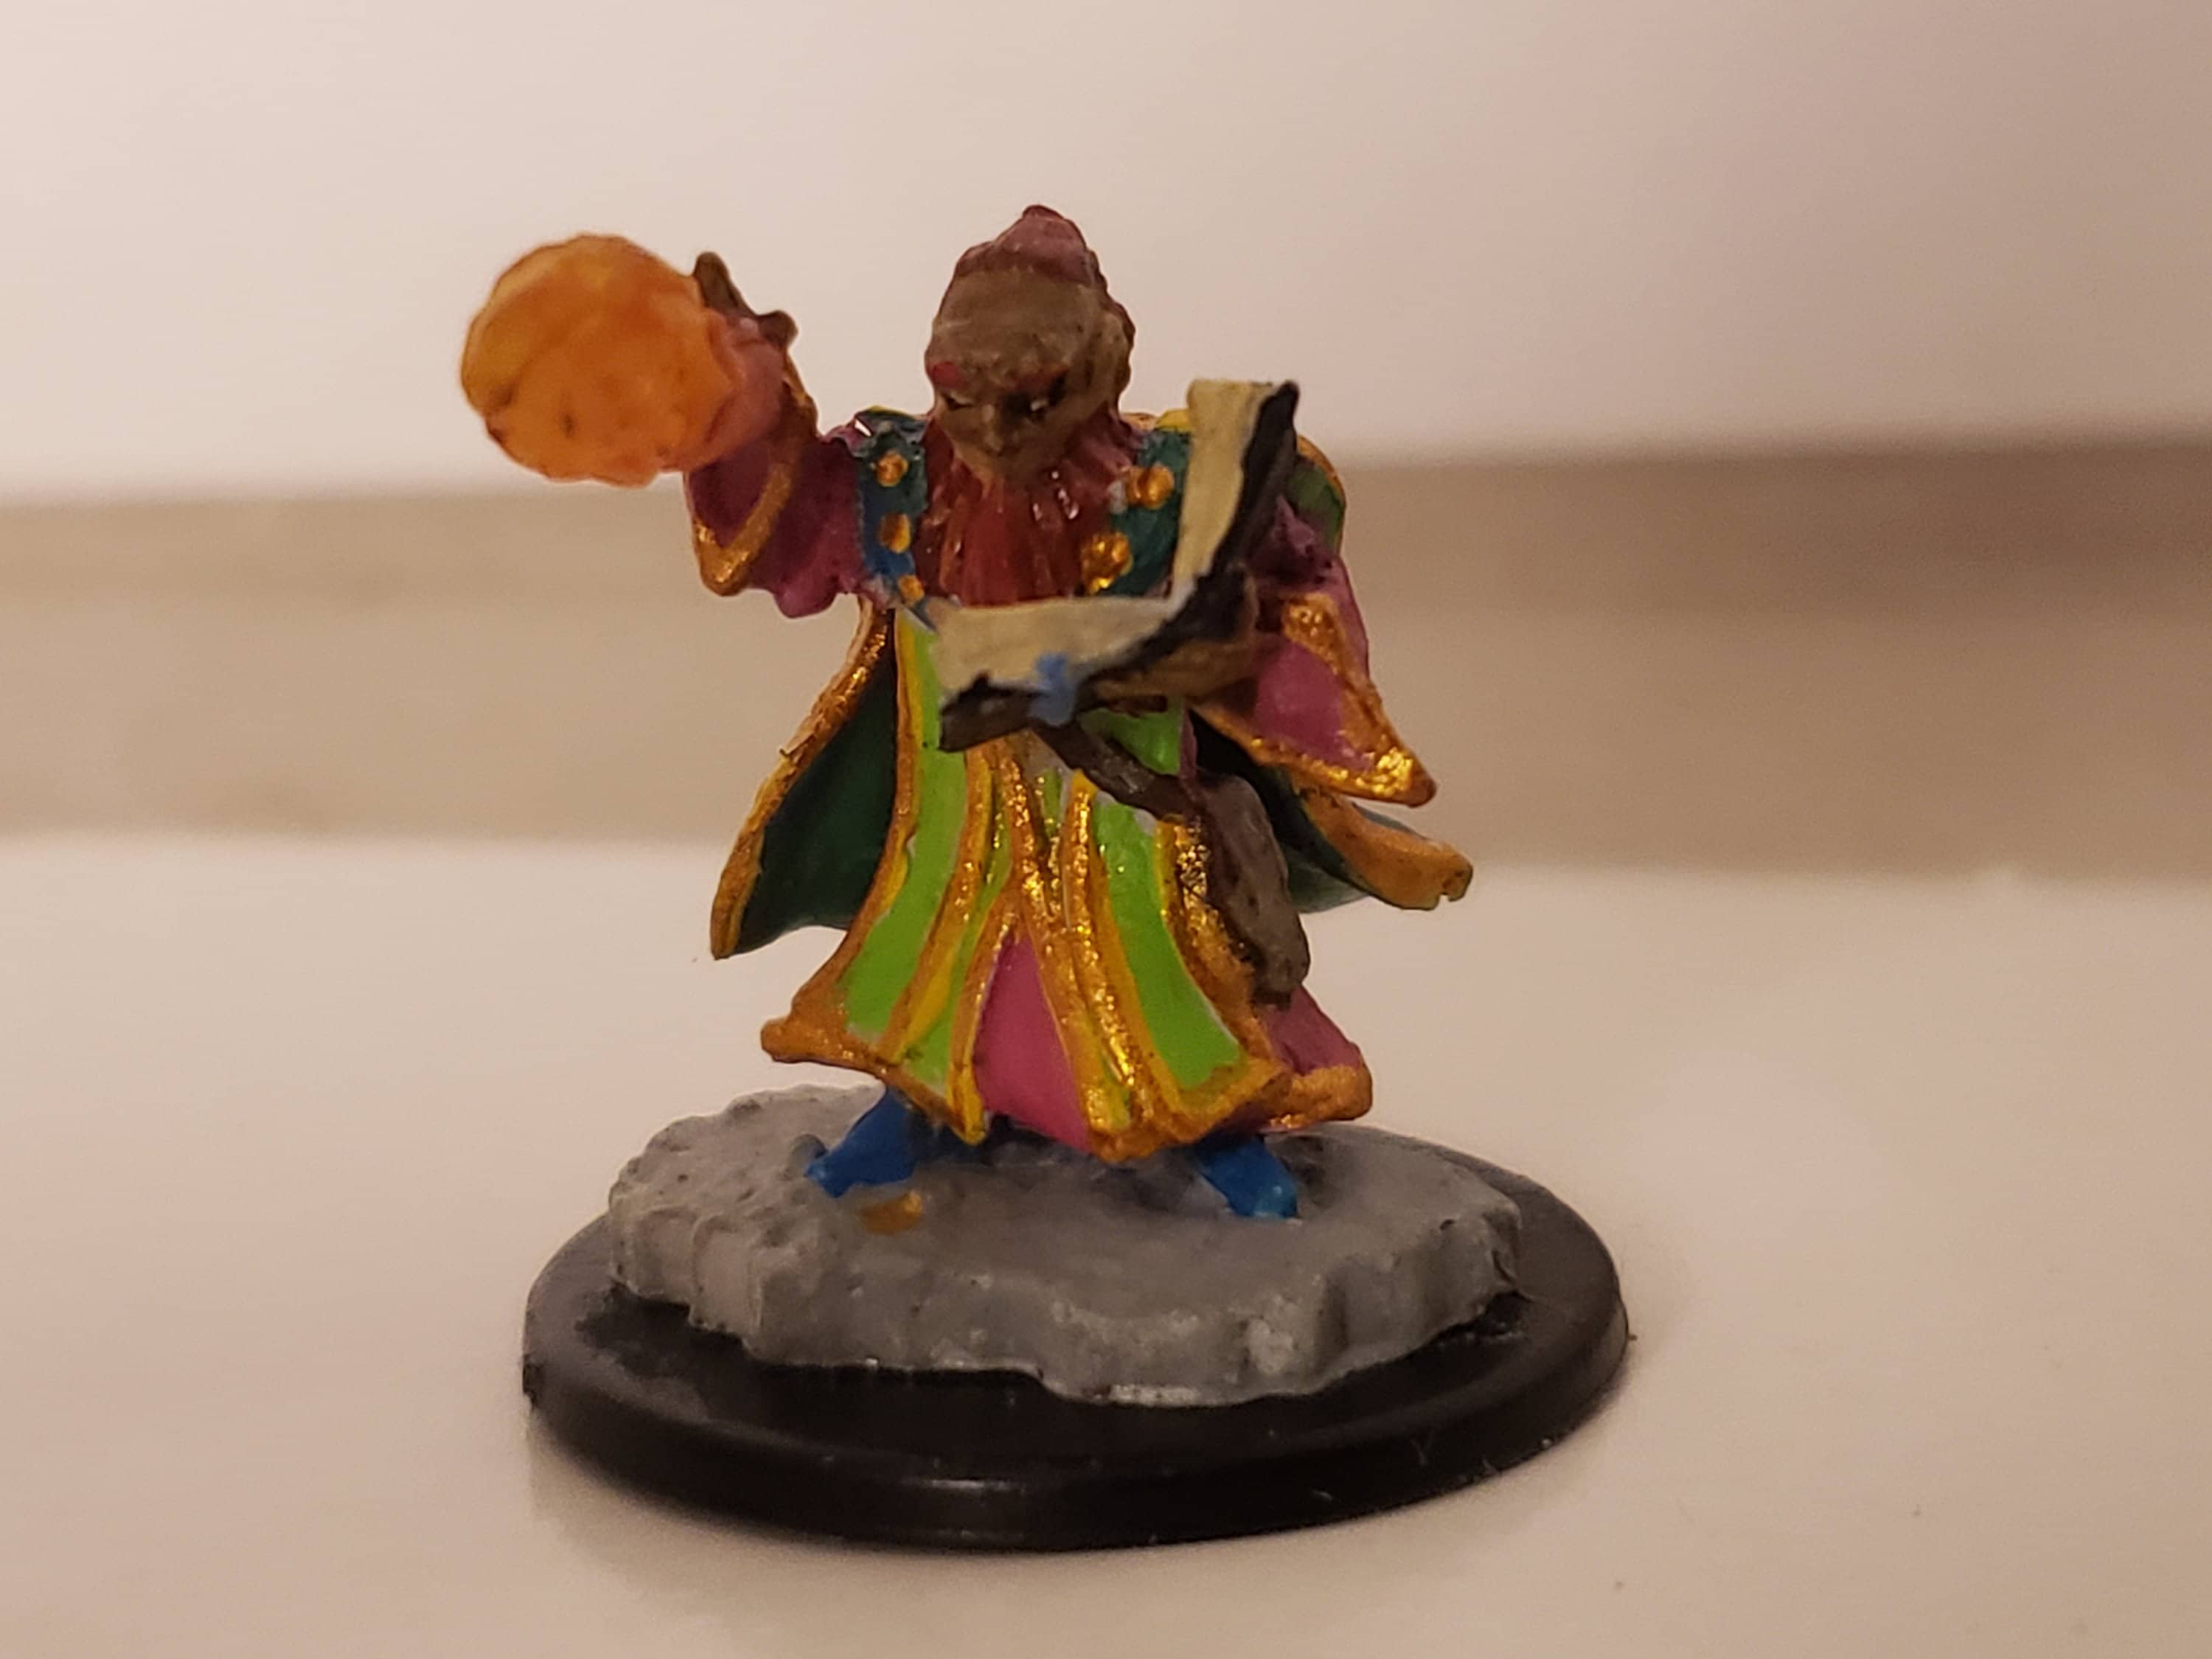 DnD Wargames 28mm Gaming Resin Miniature Pathfinder Tabletop Miniature Gnome Sorcerer or Wizard for Dungeons and Dragons